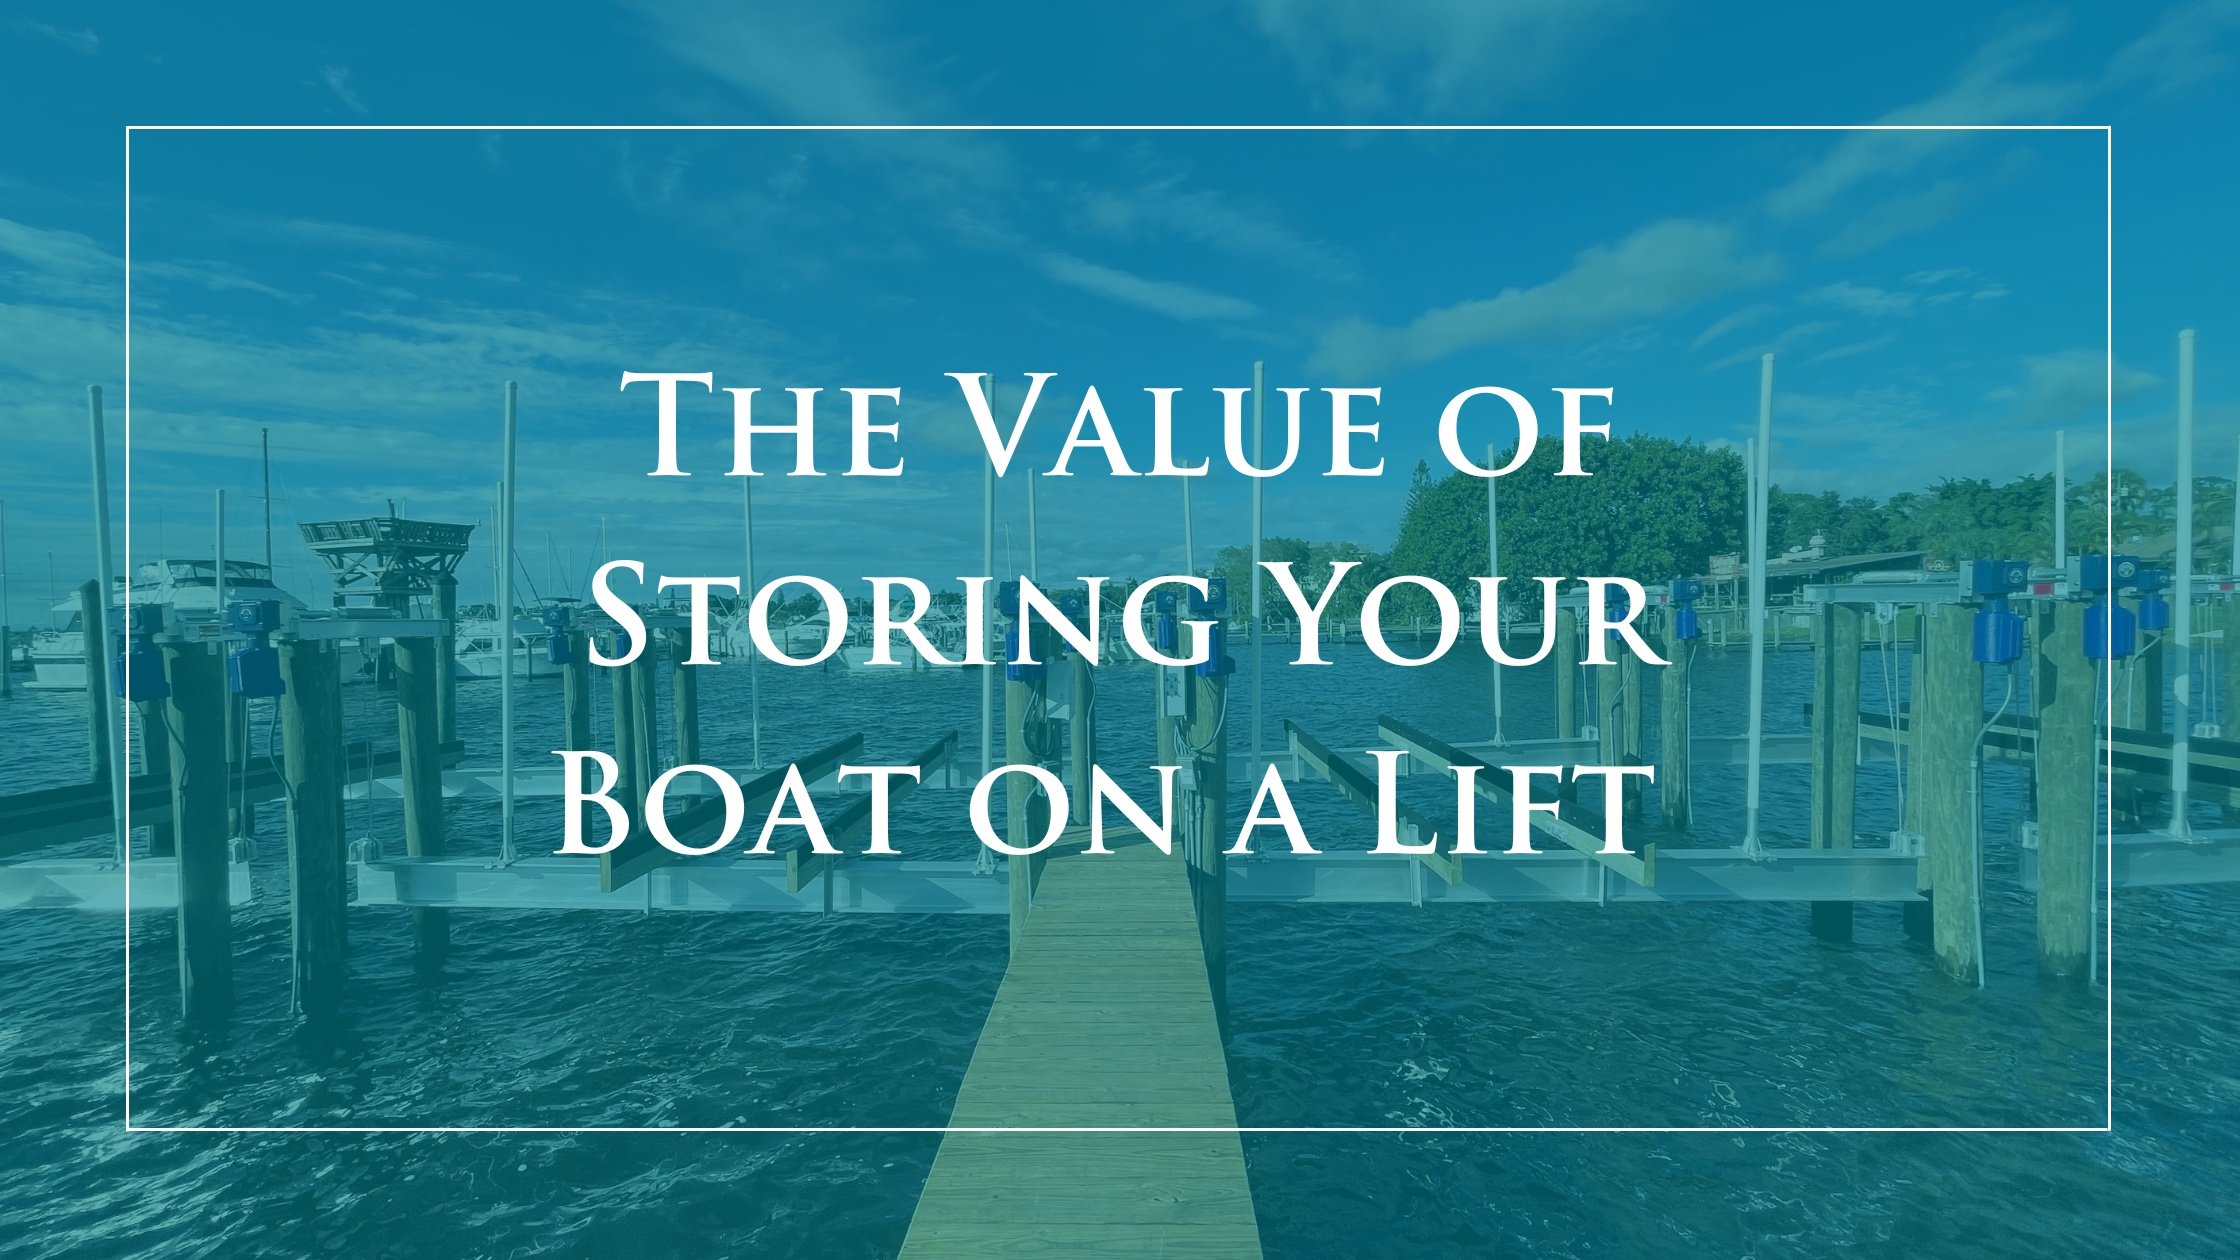 The Value of Storing Your Boat on a Lift